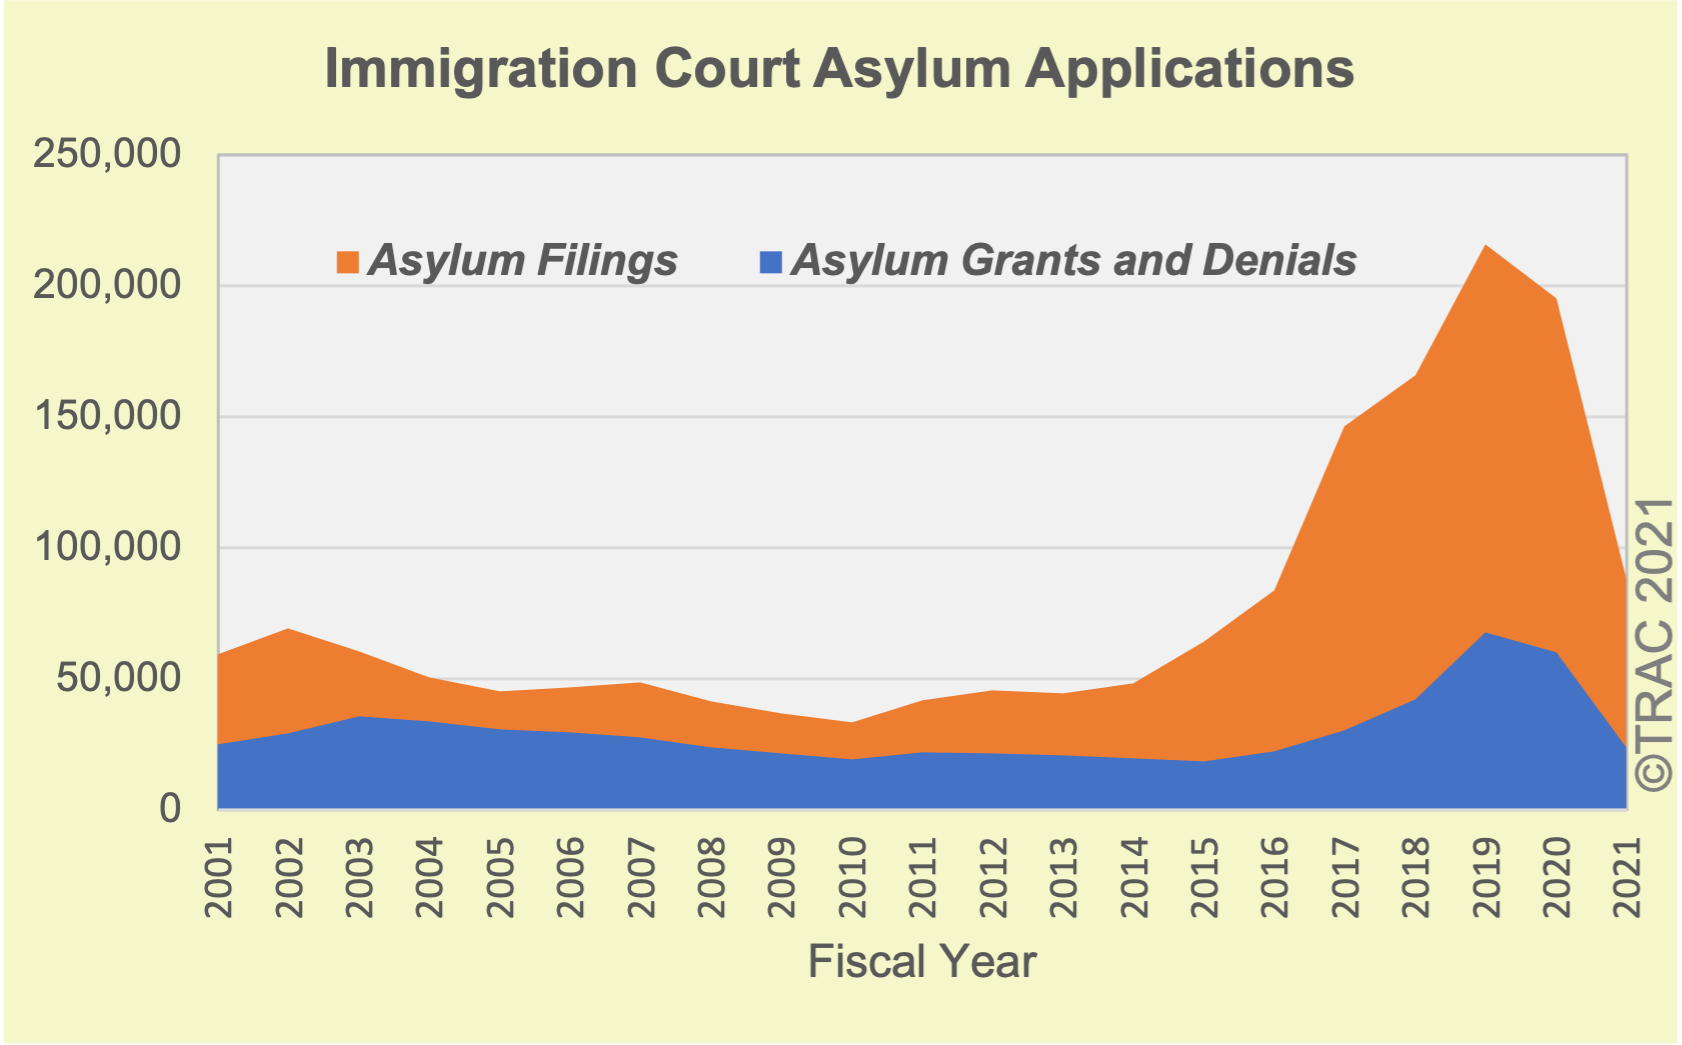 A Mounting Asylum Backlog and Growing Wait Times